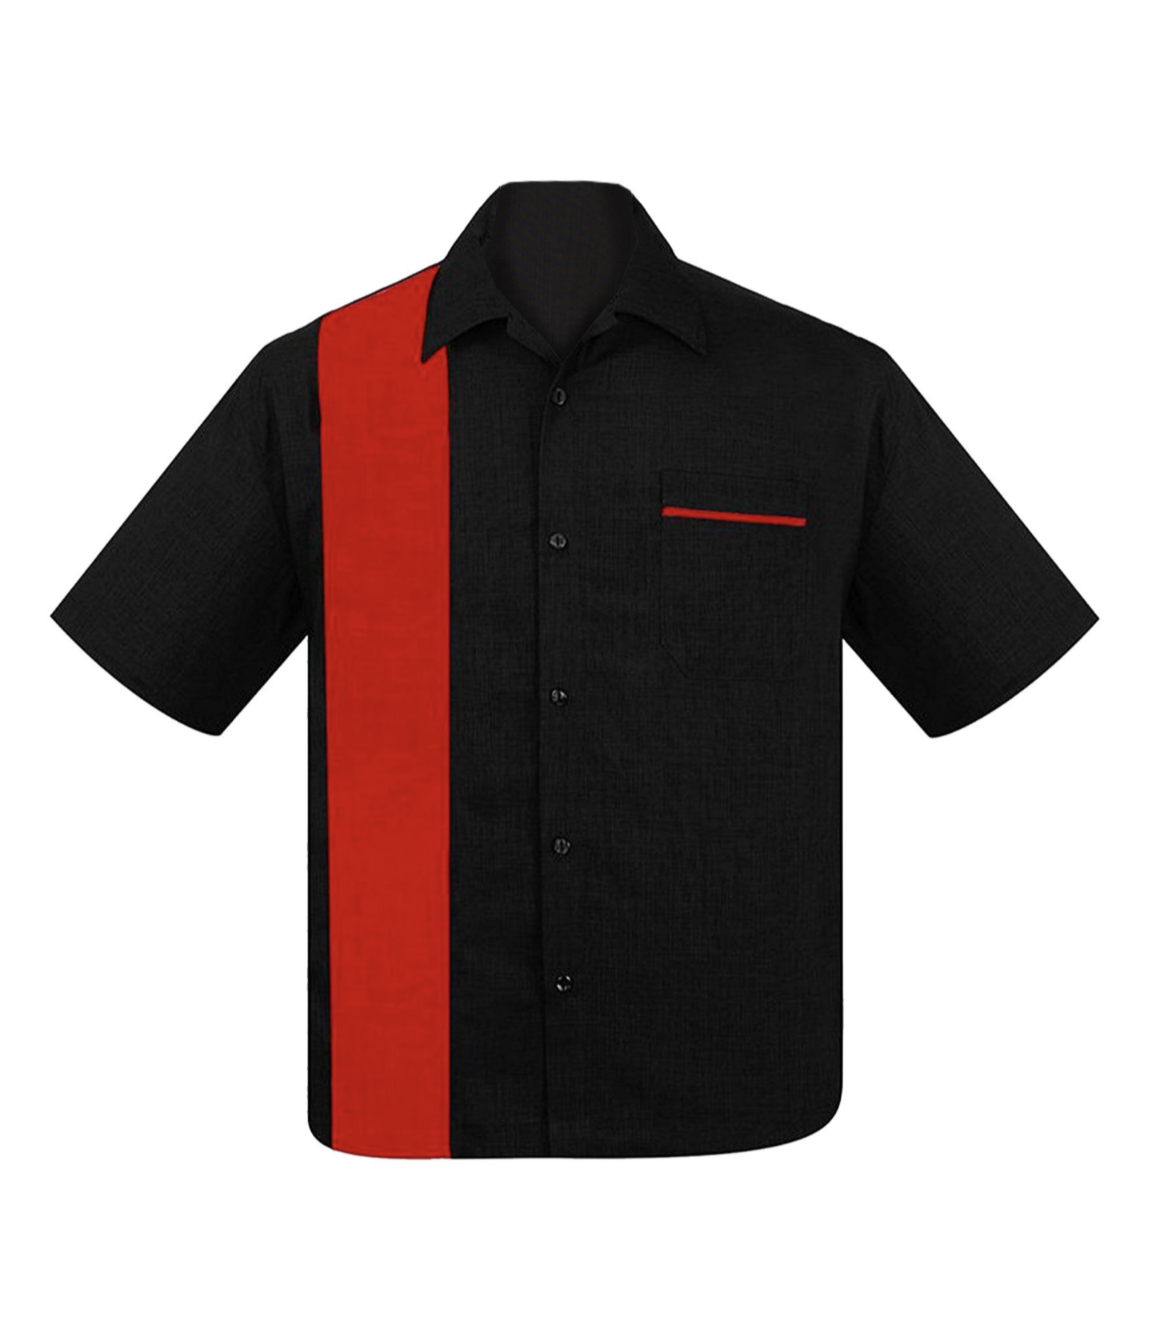 Poplin Single Panel Shirt in Black and Red by Steady Clothing Rockabilly